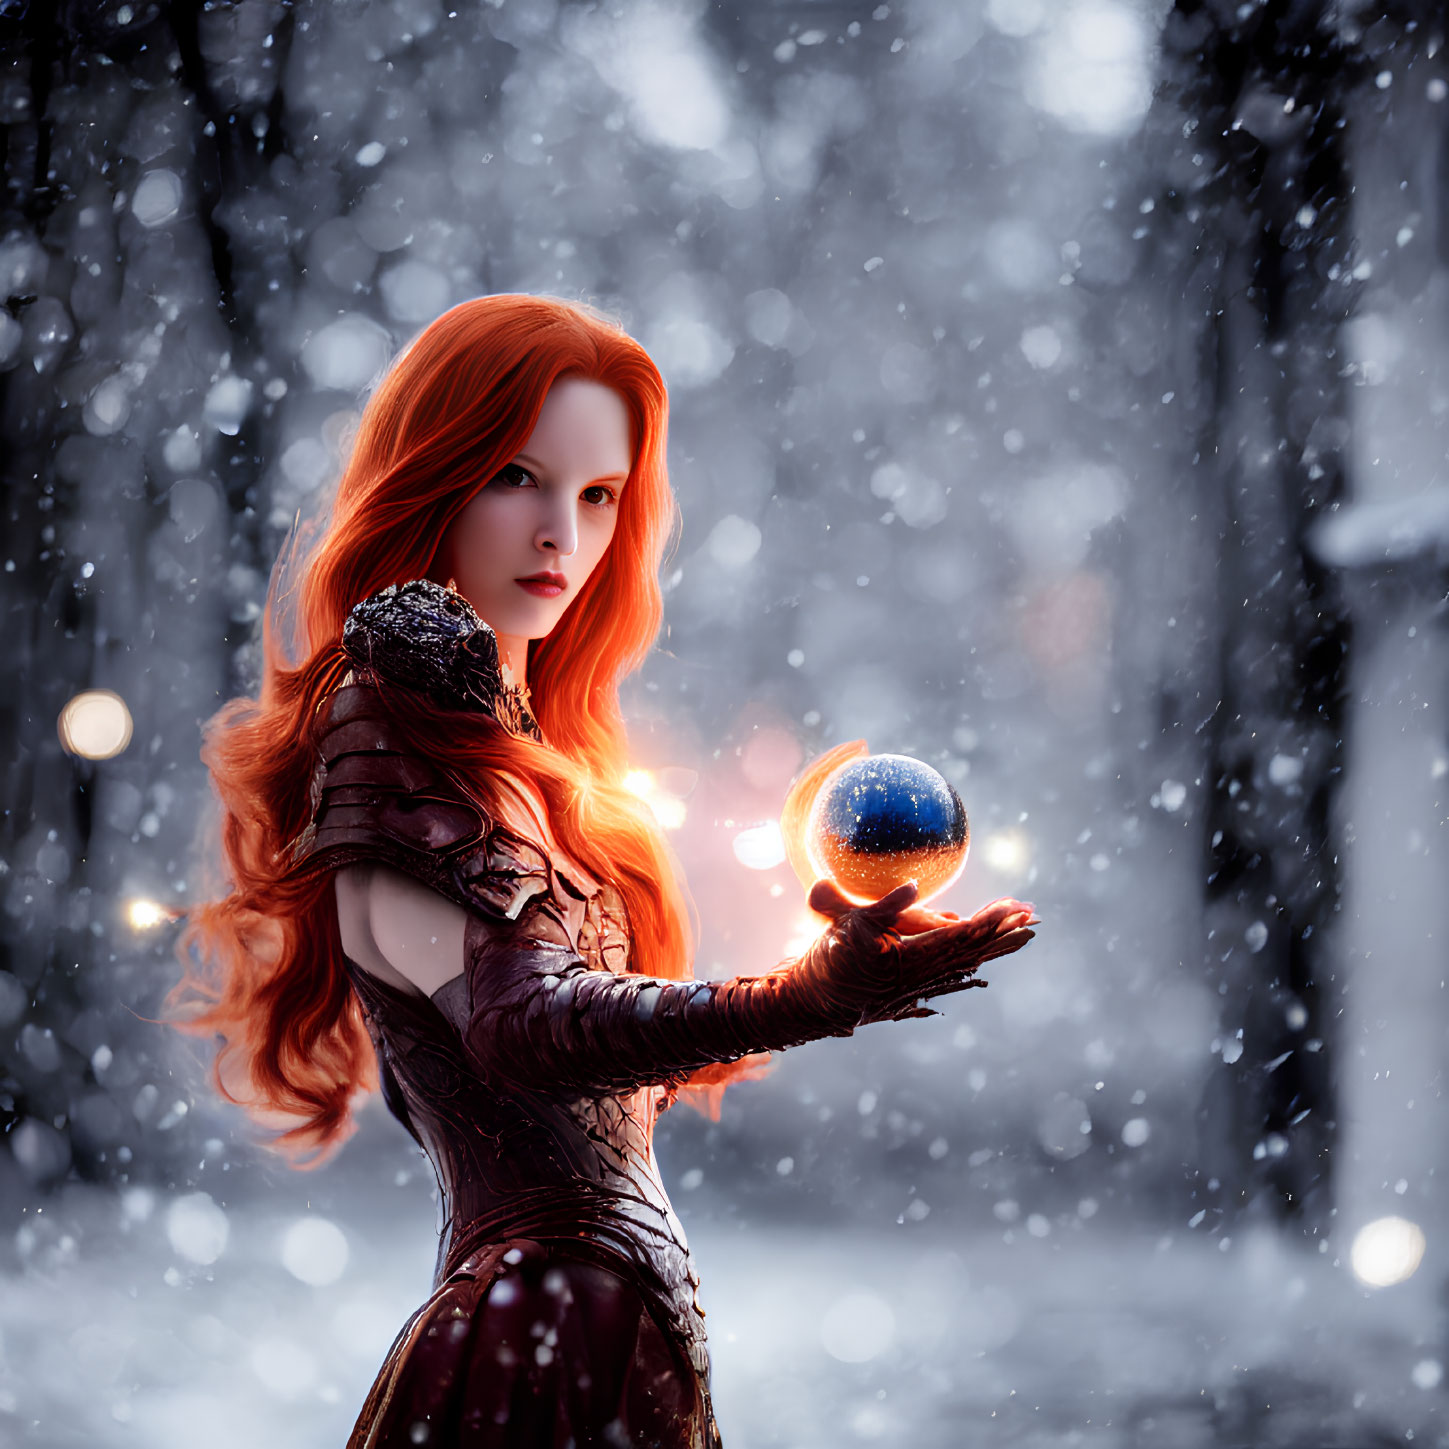 Red-Haired Woman with Glowing Orb in Snowy Forest